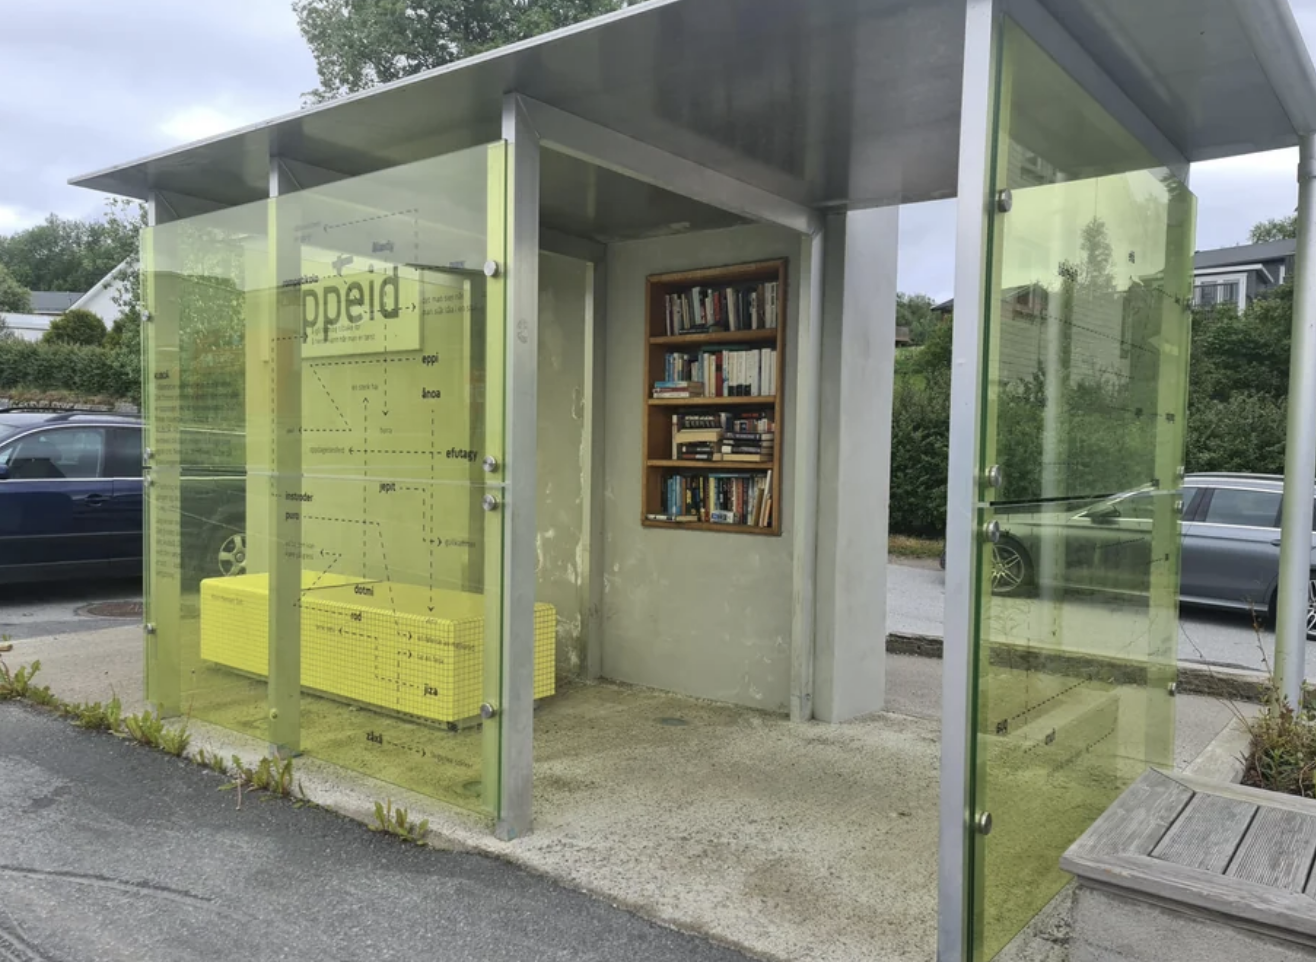 The bus stop is covered, so it&#x27;s protected from the elements, and has a book shelf filled with books built into the wall